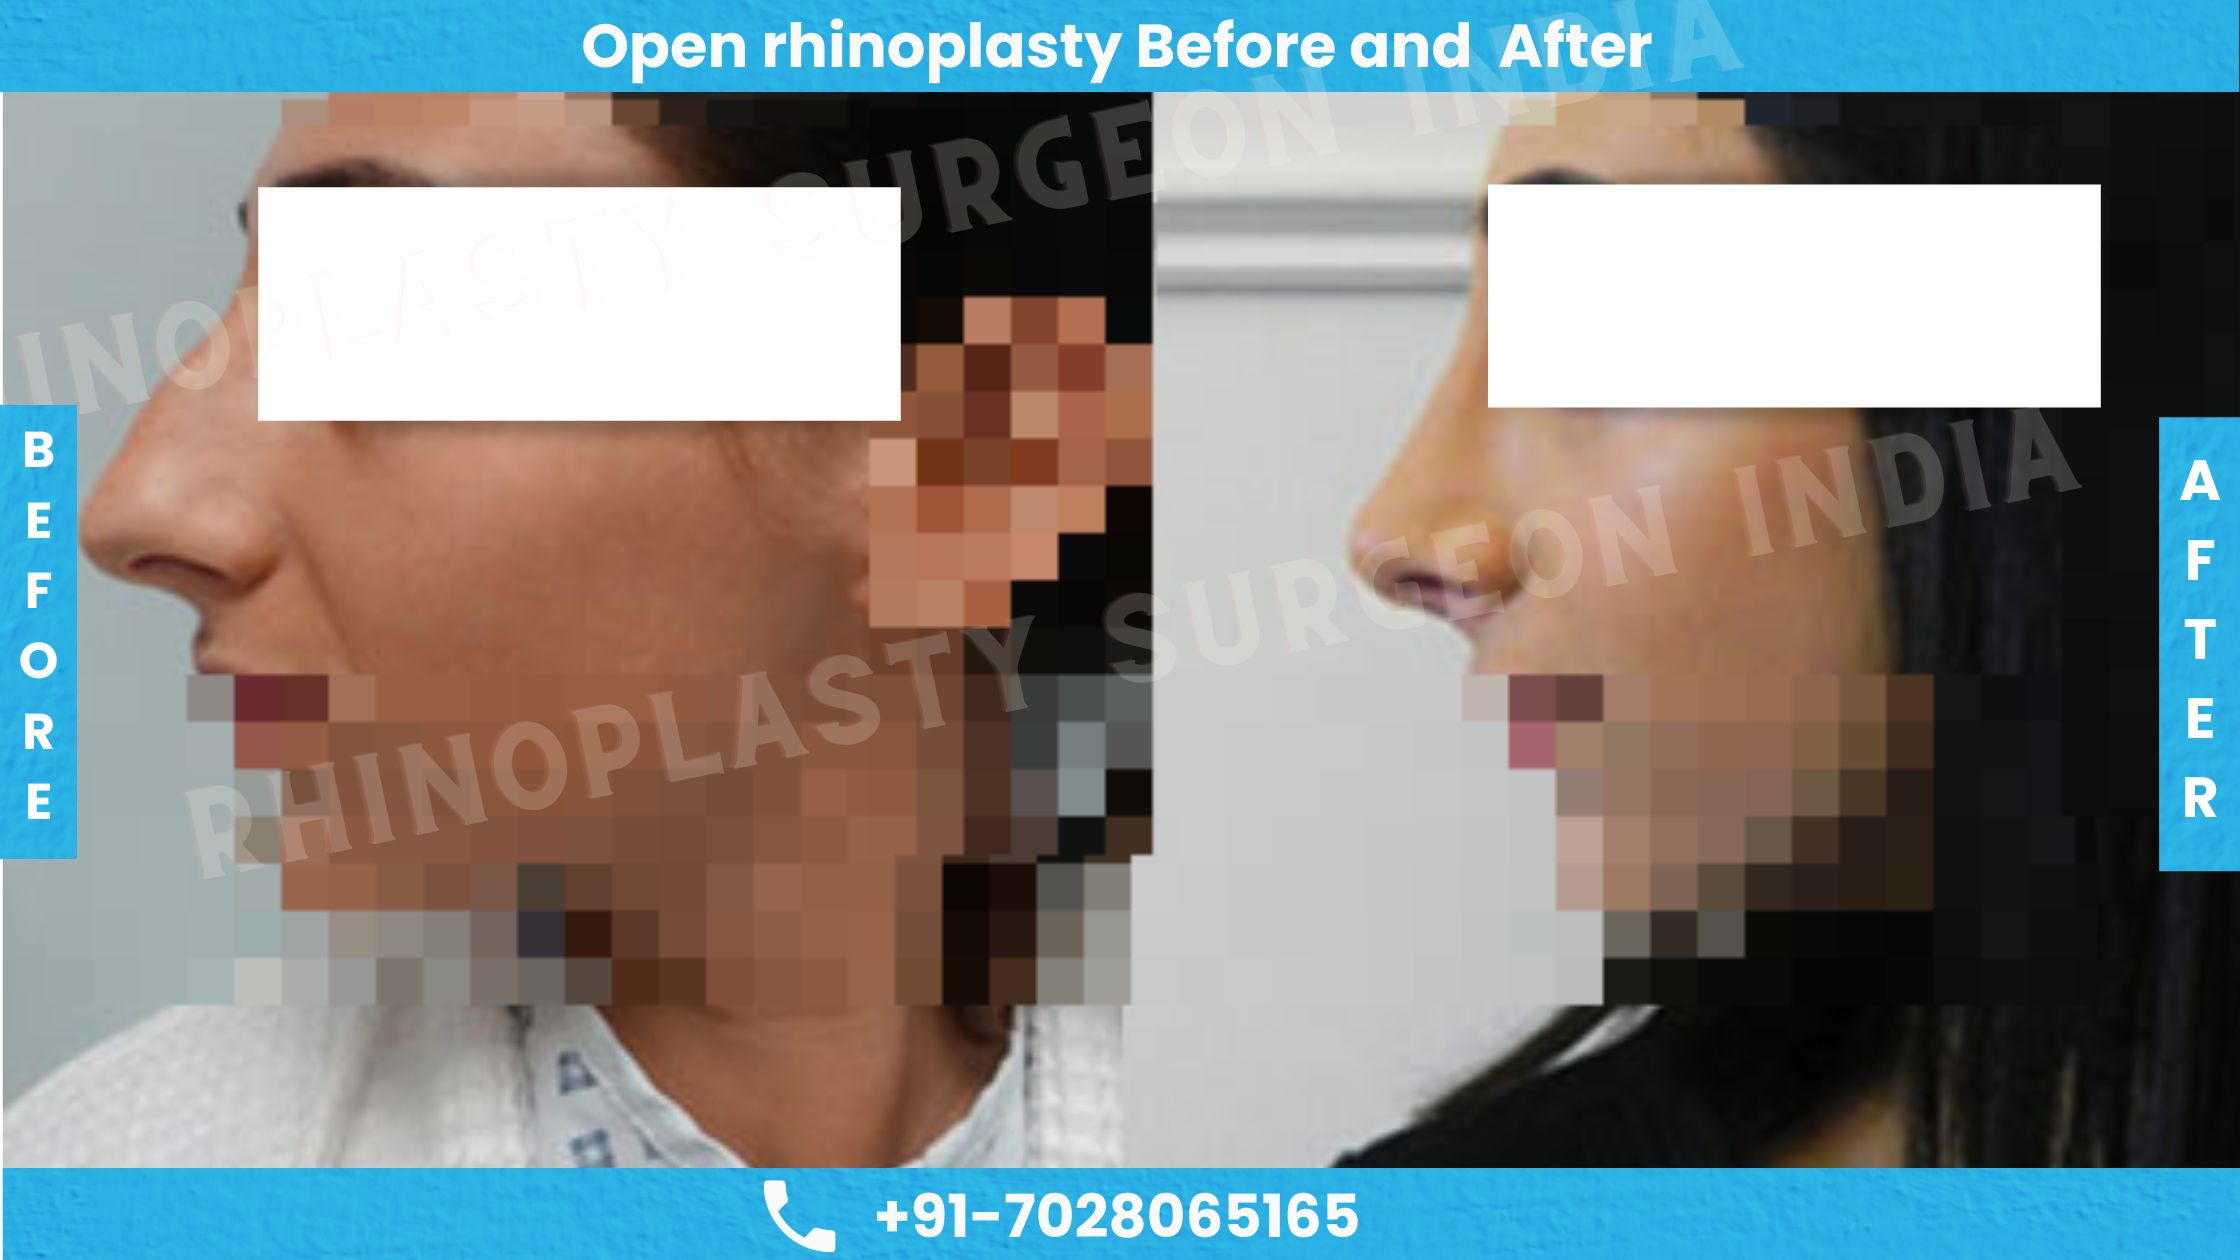 Before and After Photos of Open Rhinoplasty